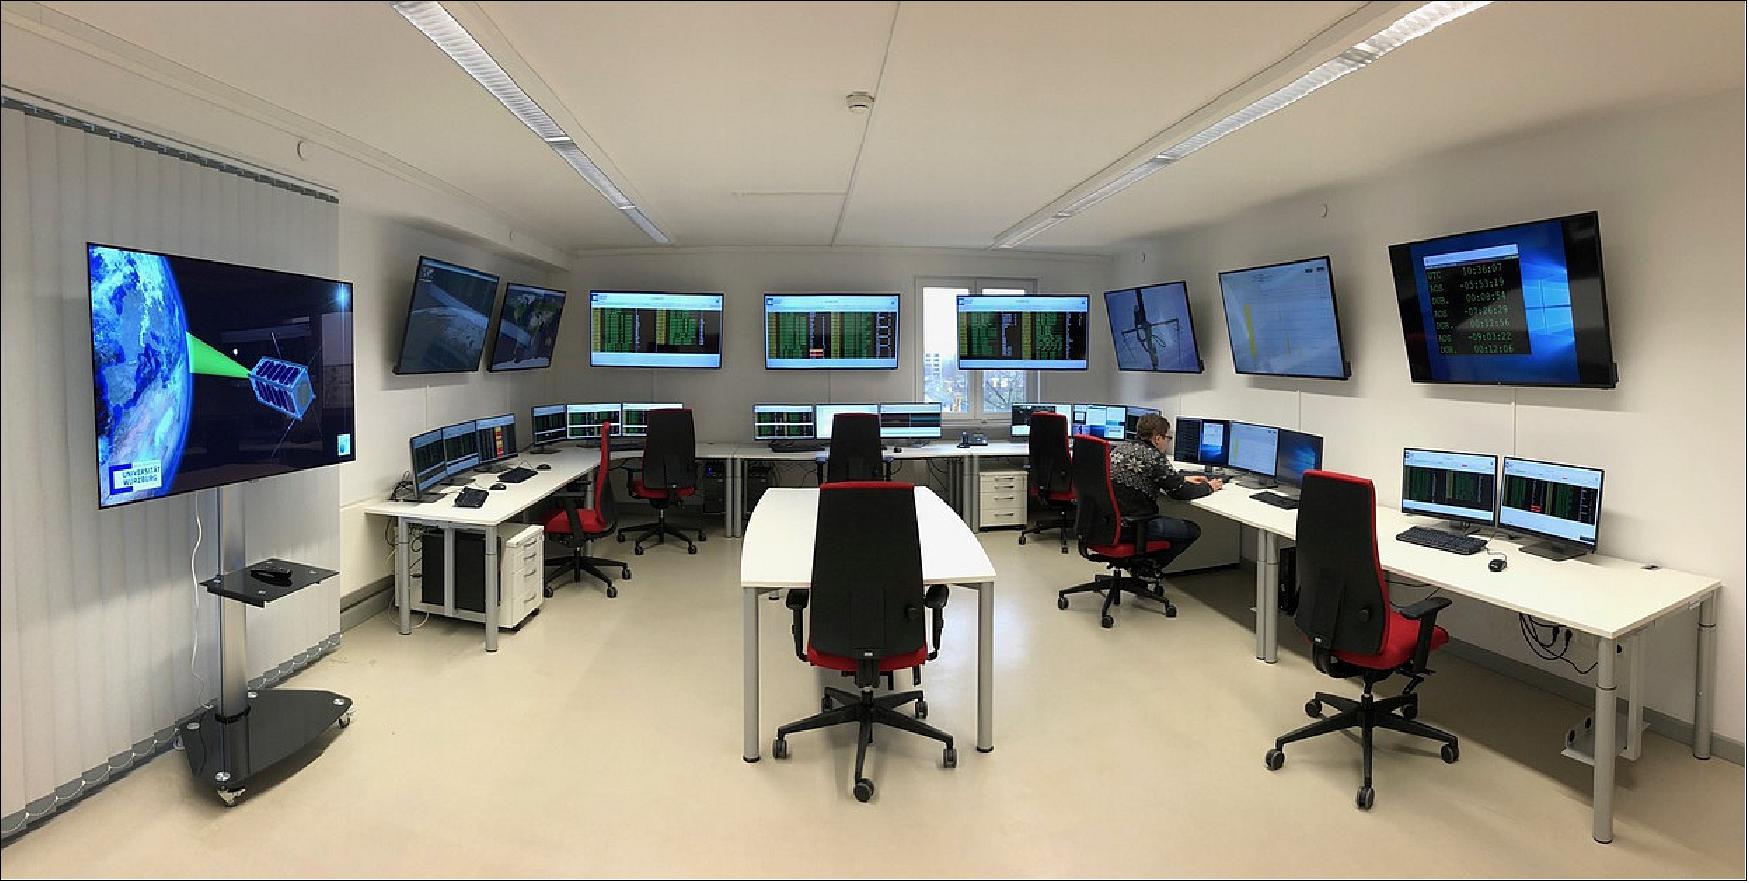 Figure 19: Photo of the SONATE mission control room (image credit: University of Wuerzburg)